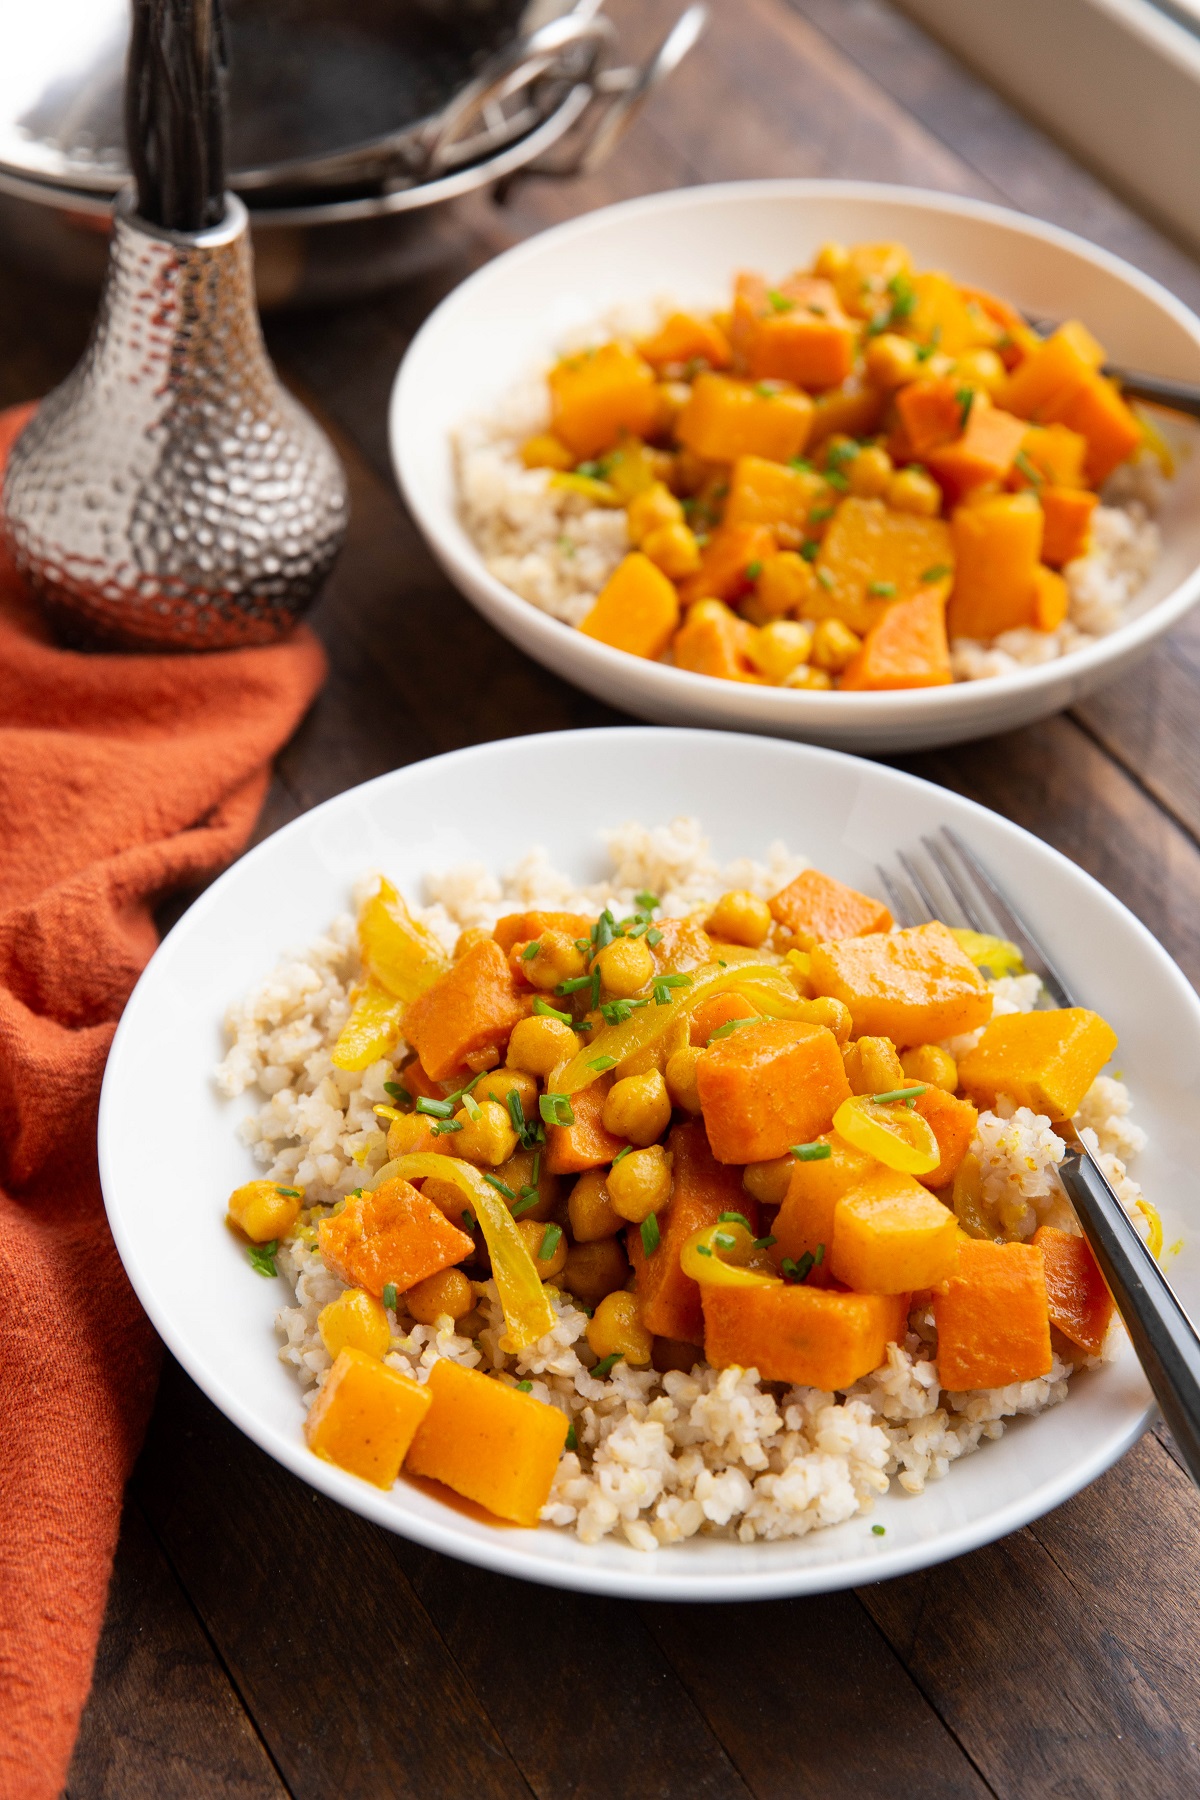 Butternut squash and yam curry recipe with brown rice and garbanzo beans in two white bowls on a wood background with a red napkin to the side.